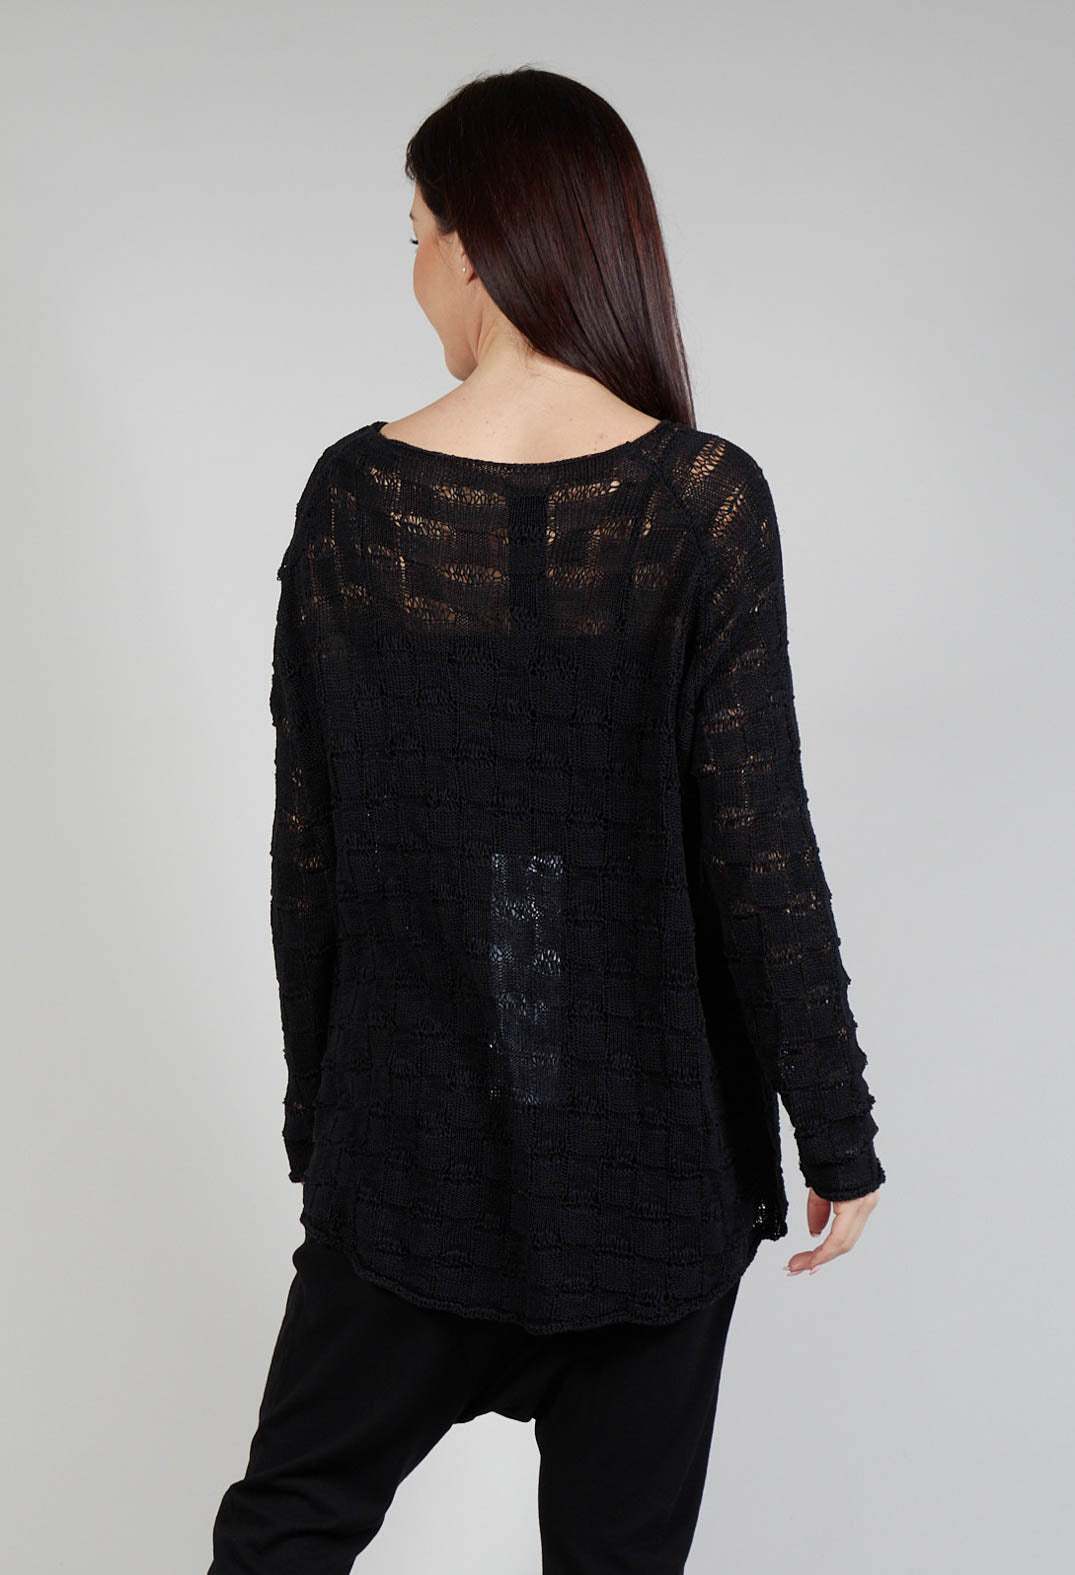 Jumper with Square Detail Knit in Black